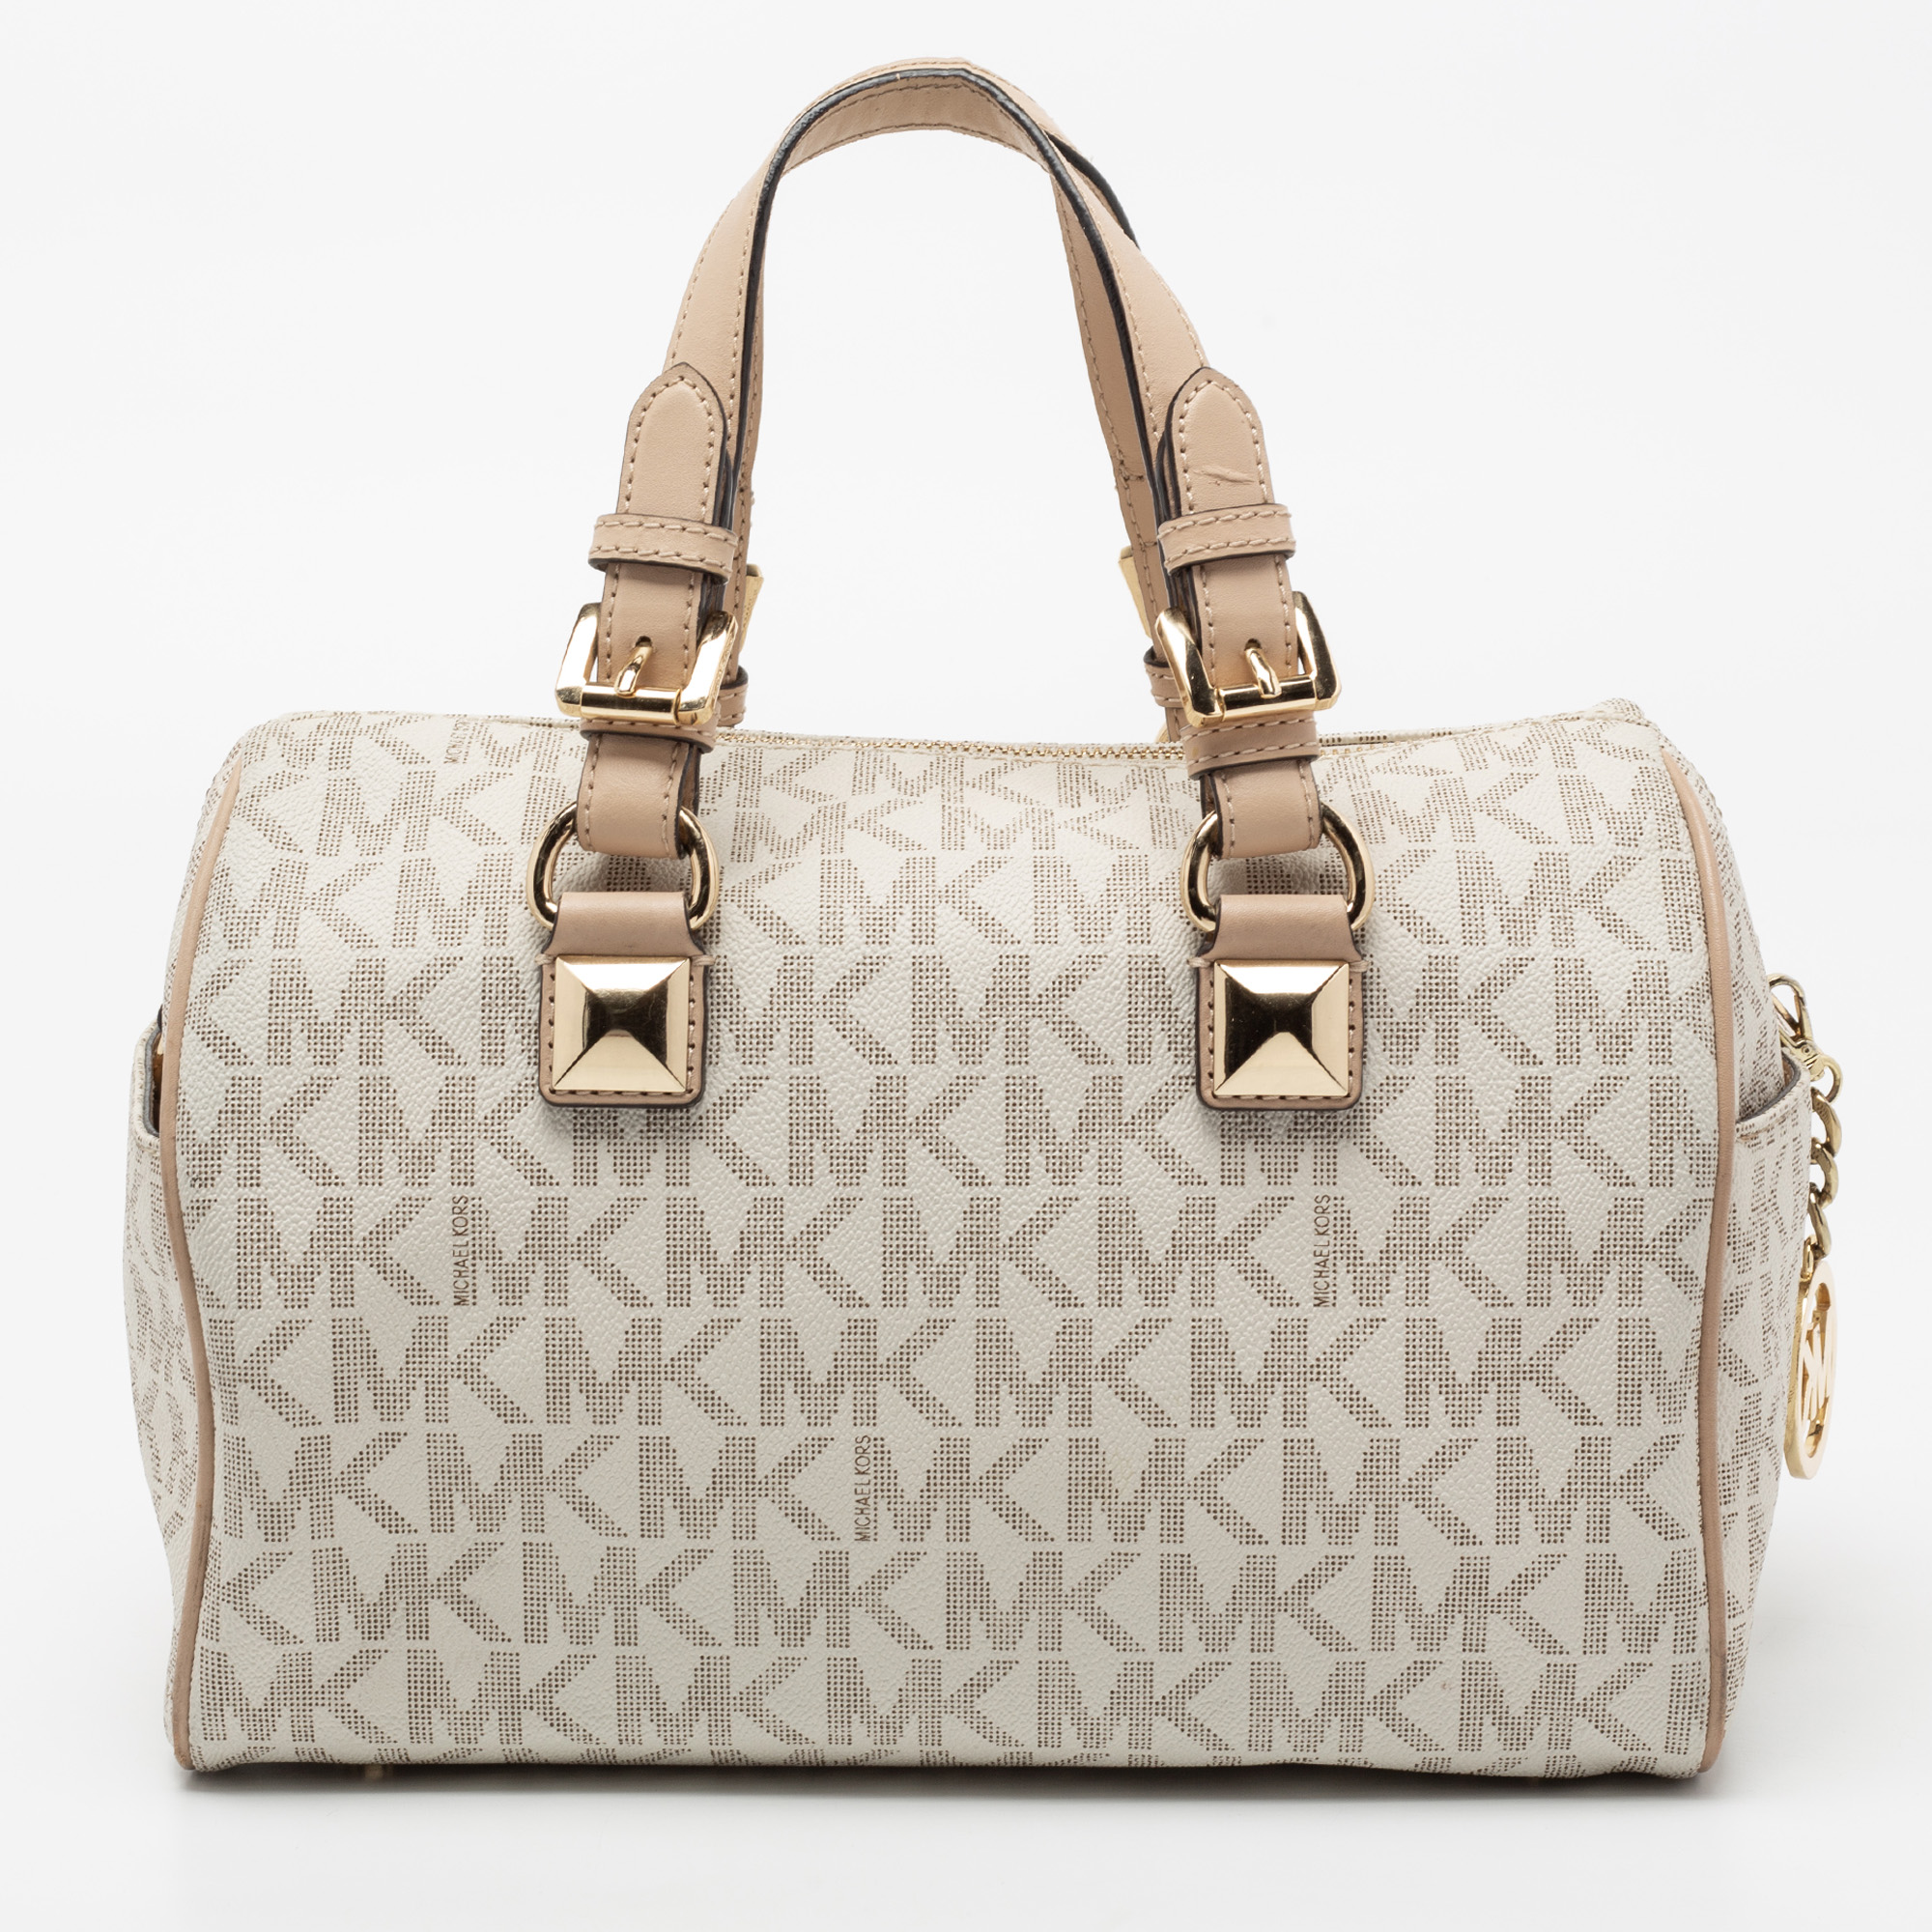 MICHAEL Michael Kors White/Beige Signature Coated Canvas And Leather Grayson Boston Bag